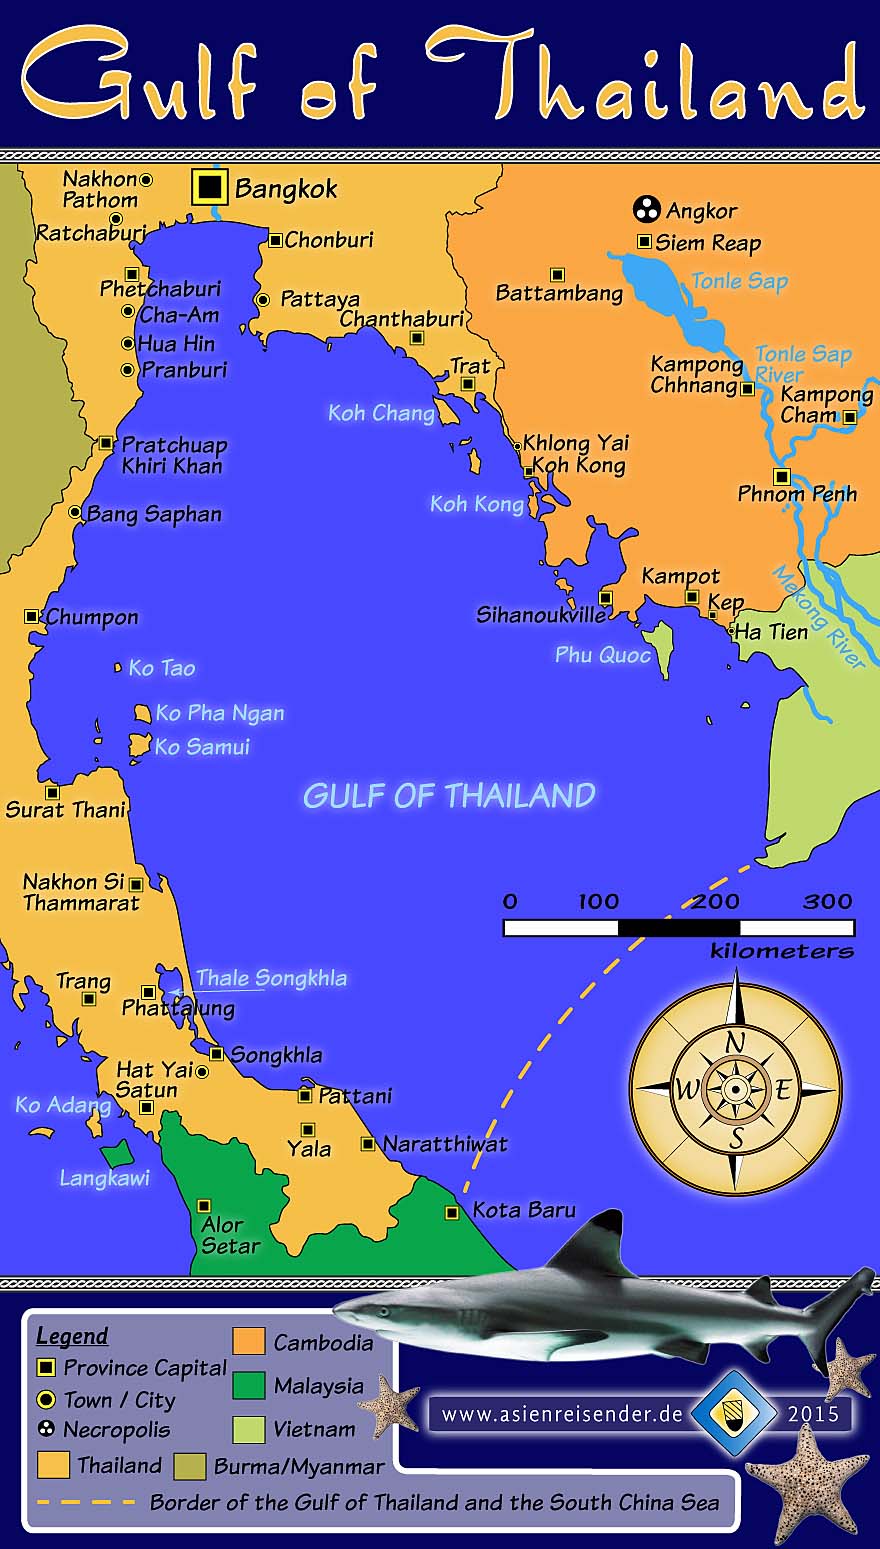 'Interactive Map of the Gulf of Thailand' by Asienreisender